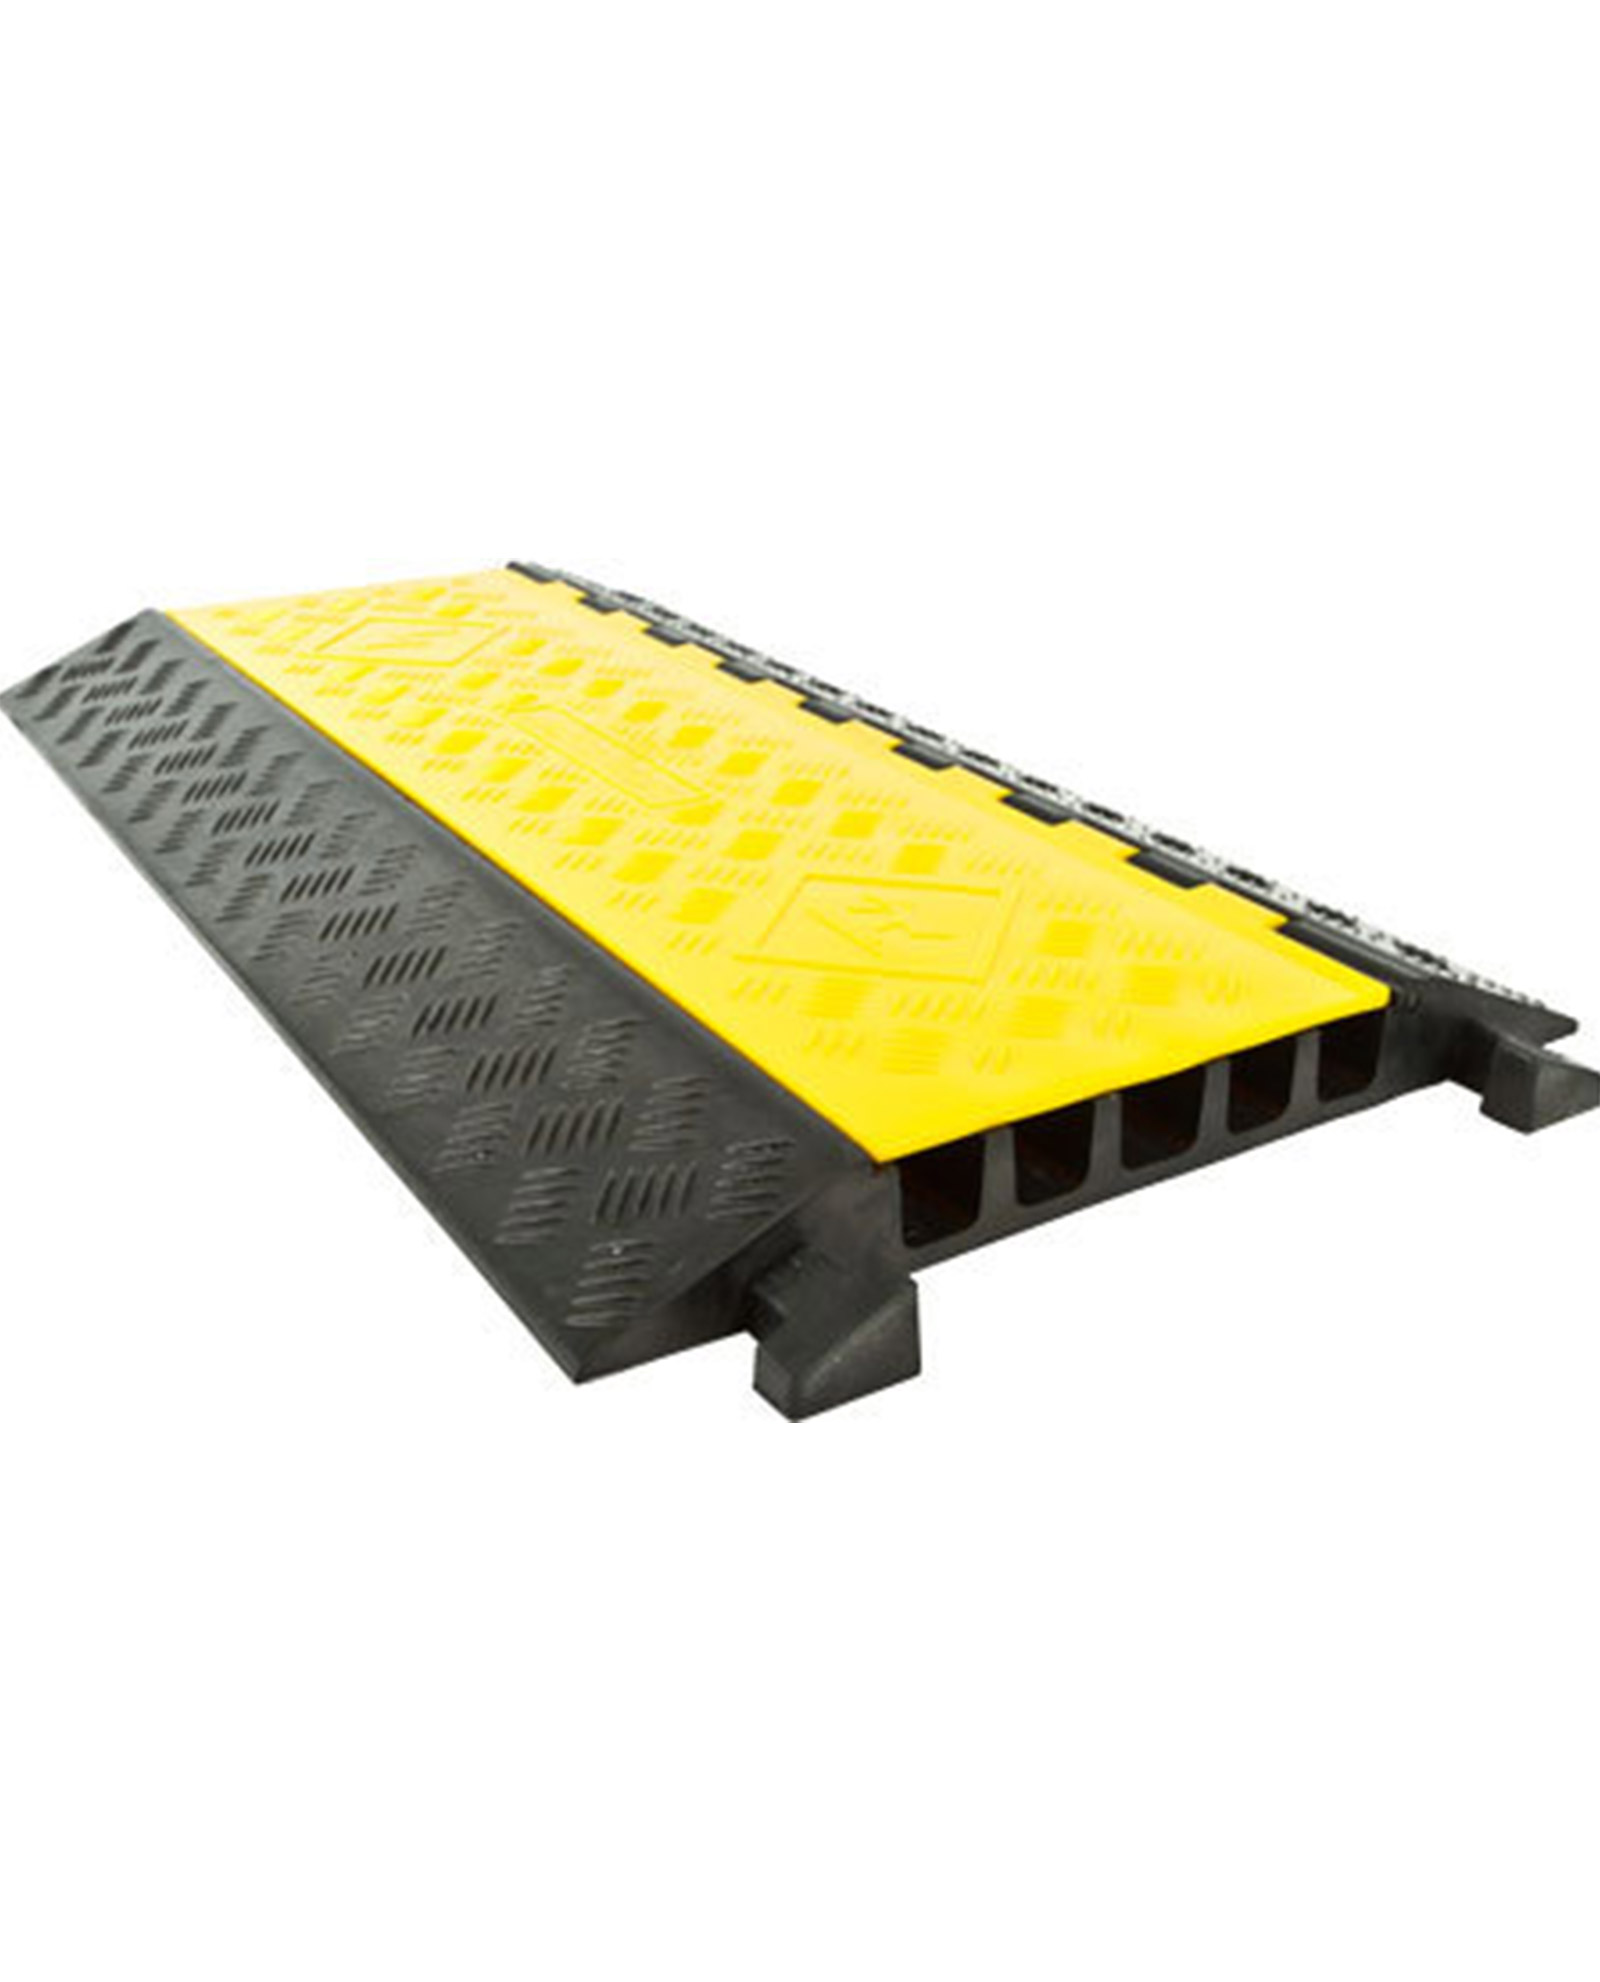 5 Channel Protector Cable Ramp